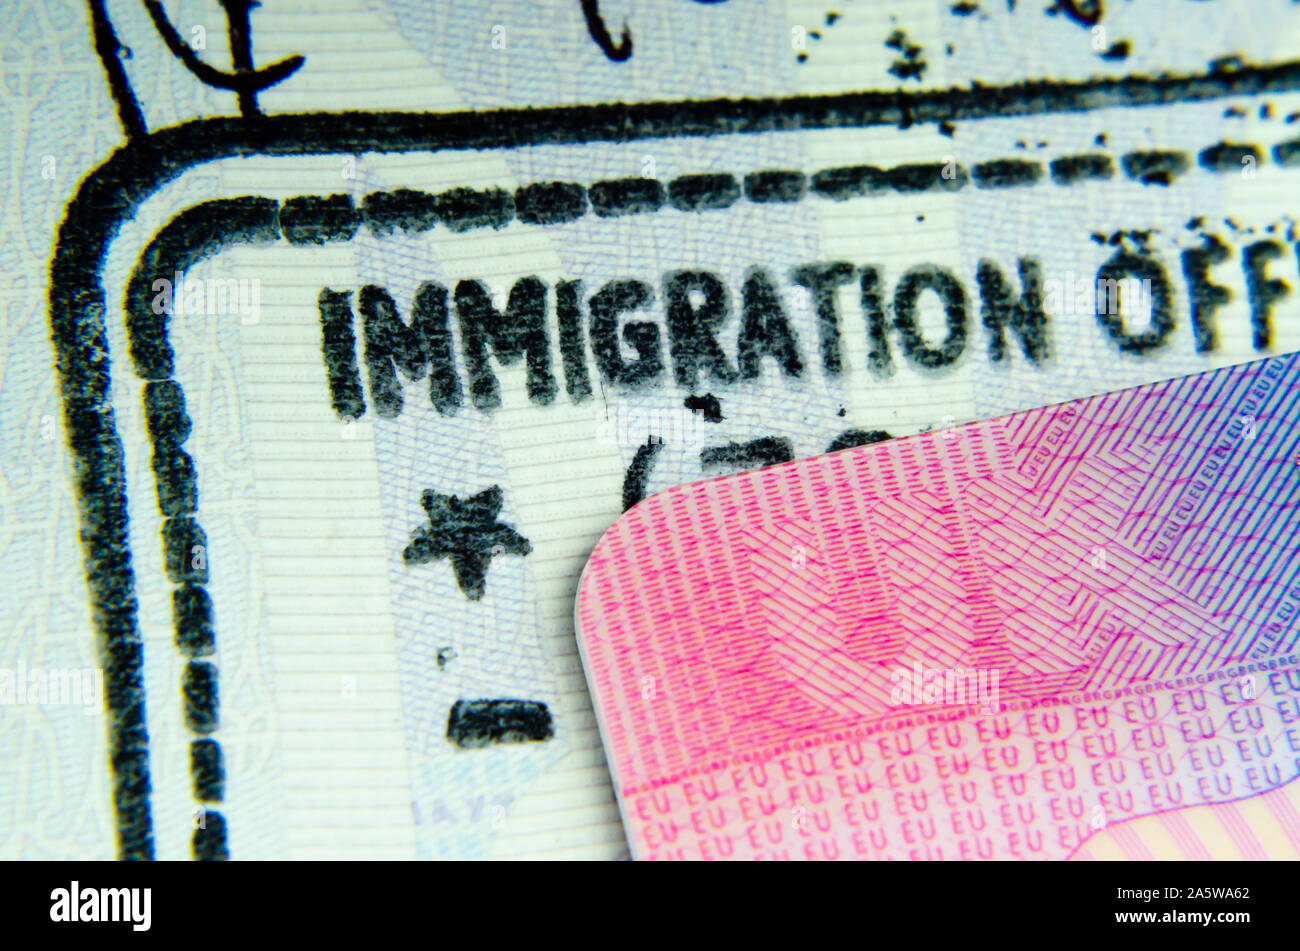 UK BRP Tier 2 visa card on top of immigration stamp in passport where only letters 'IMMIGRATION OFF' visible from the  'IMMIGRATION OFFICER' phrase. Stock Photo